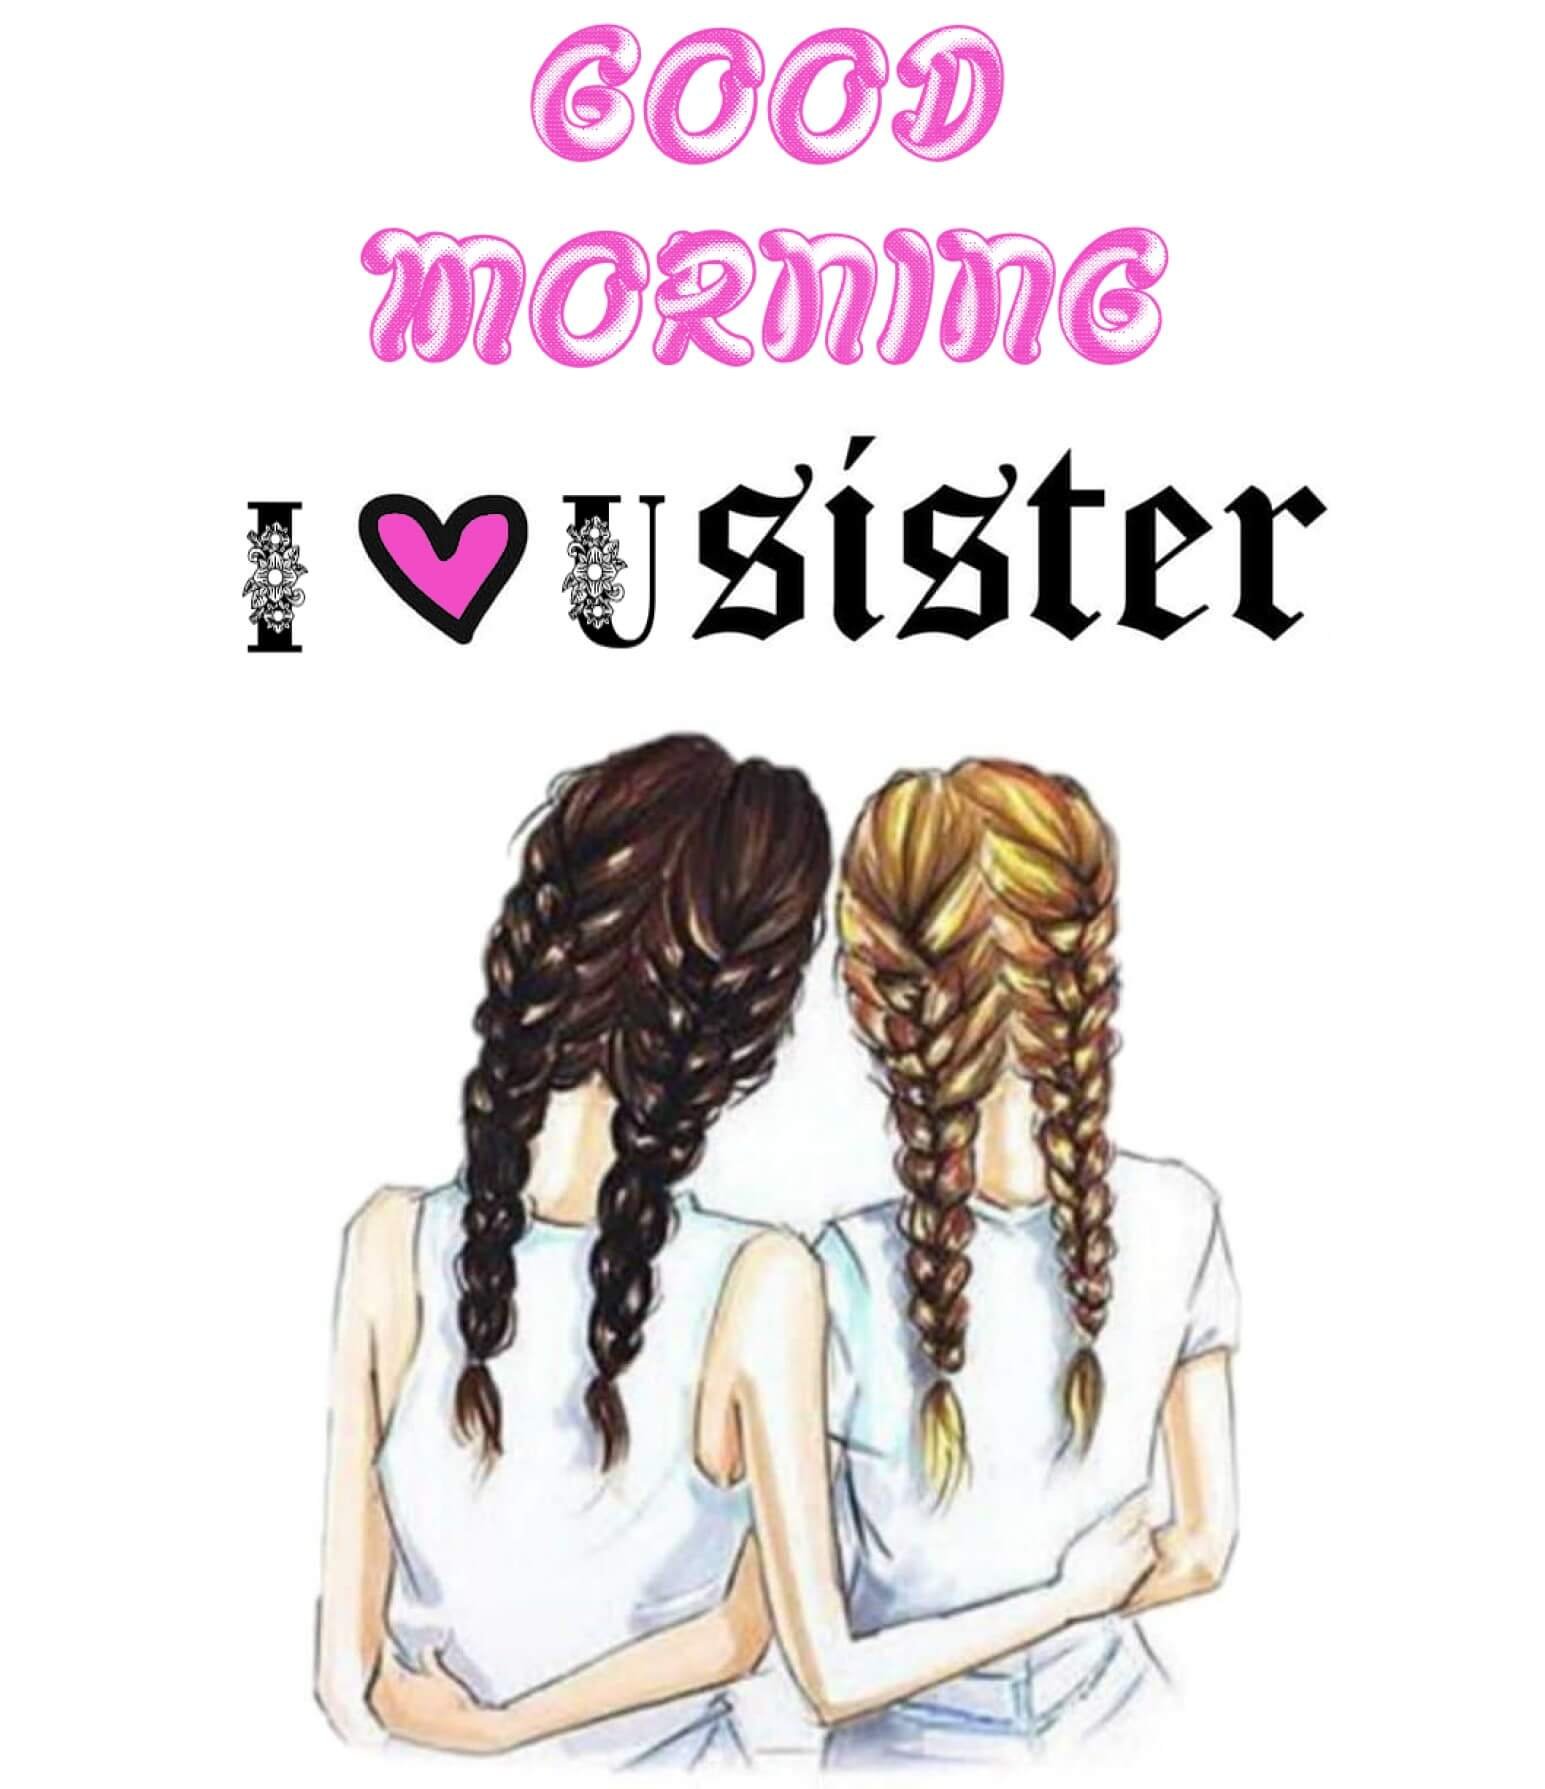 New Style Good Morning Sister Quotes 2023 Images Whatsapp Watermark Free Trademark